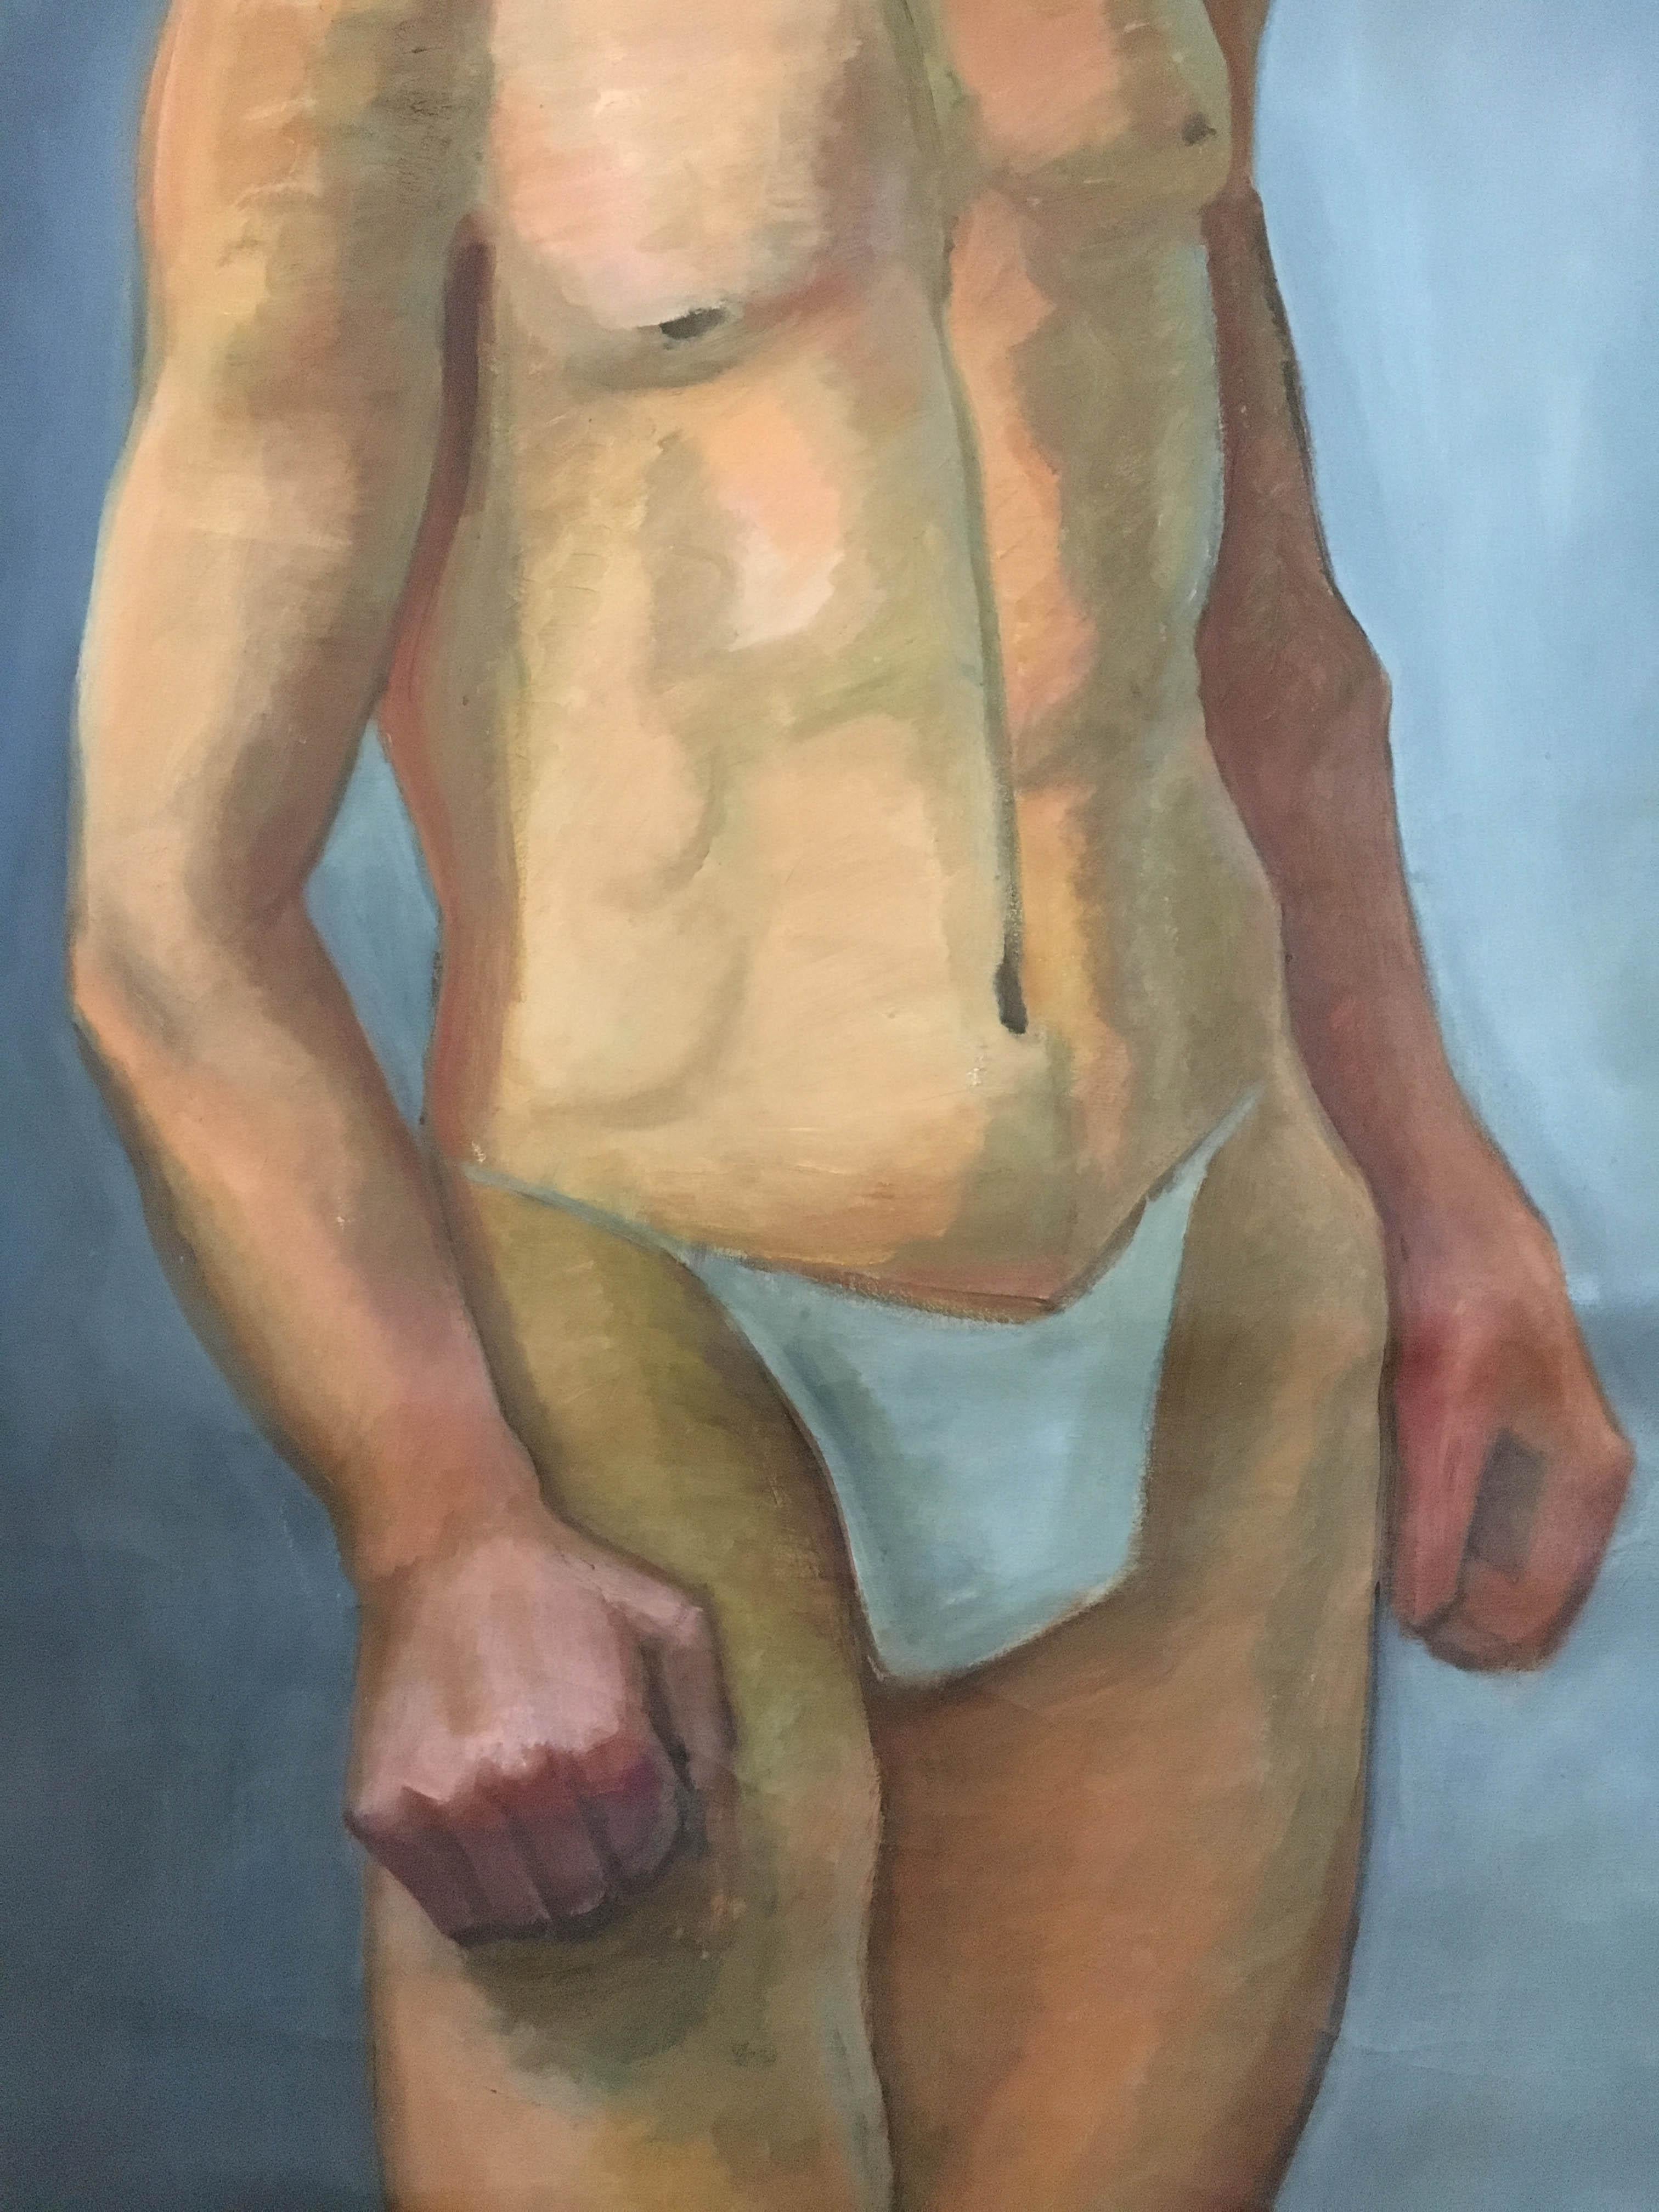 Canvas 1933 Male 'White' Men Nude Portrait Study Oil Painting by Olga von Mossig-Zupan For Sale